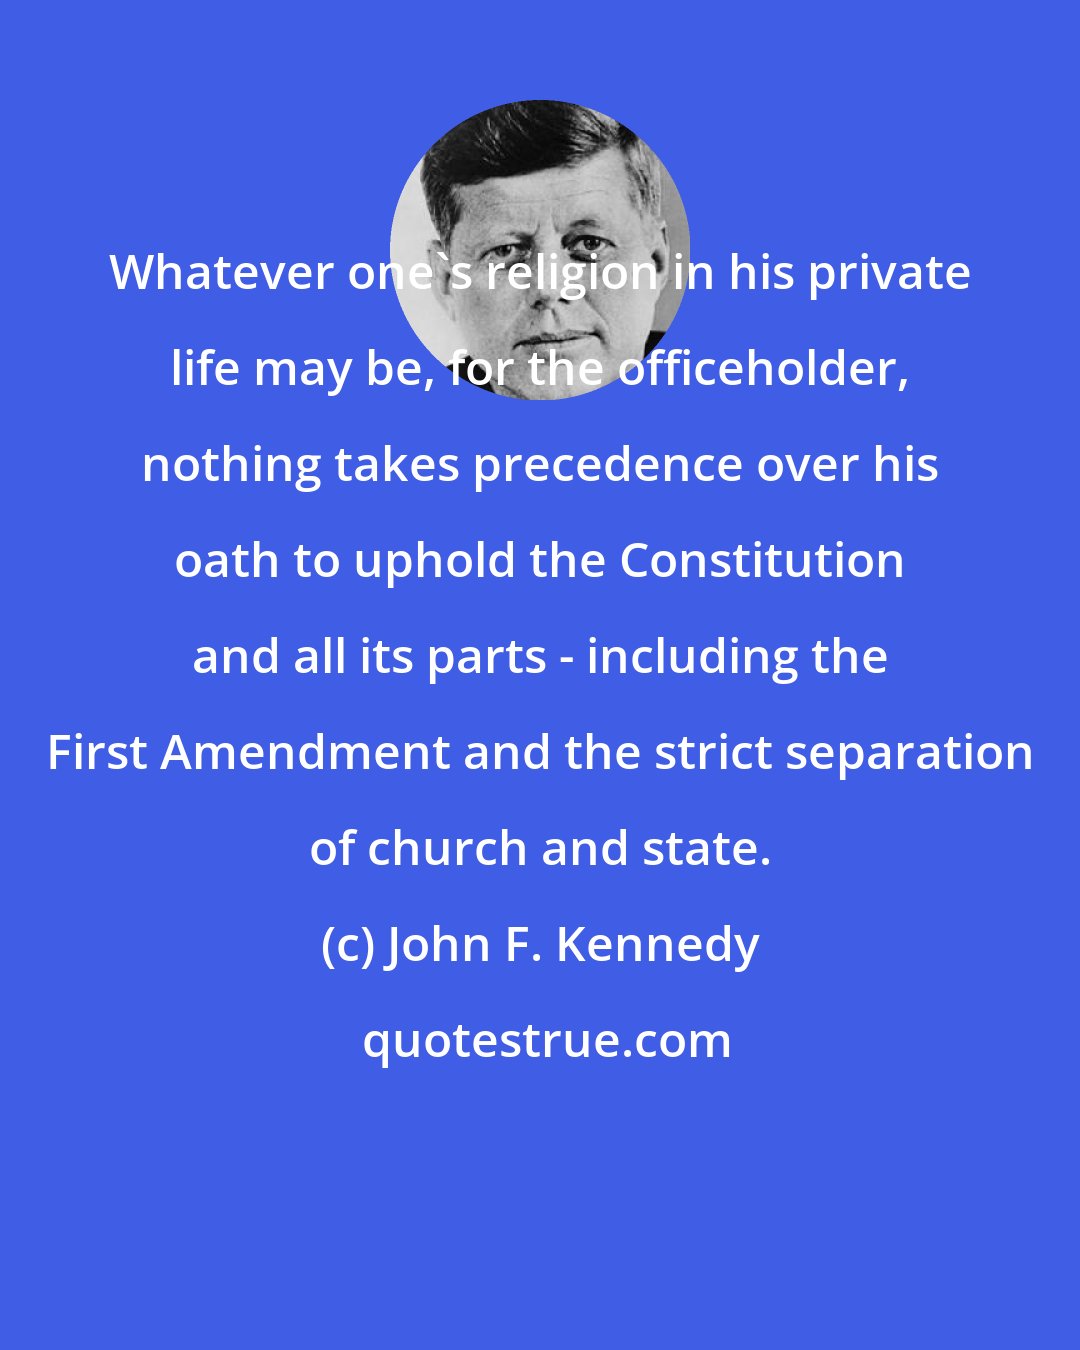 John F. Kennedy: Whatever one's religion in his private life may be, for the officeholder, nothing takes precedence over his oath to uphold the Constitution and all its parts - including the First Amendment and the strict separation of church and state.